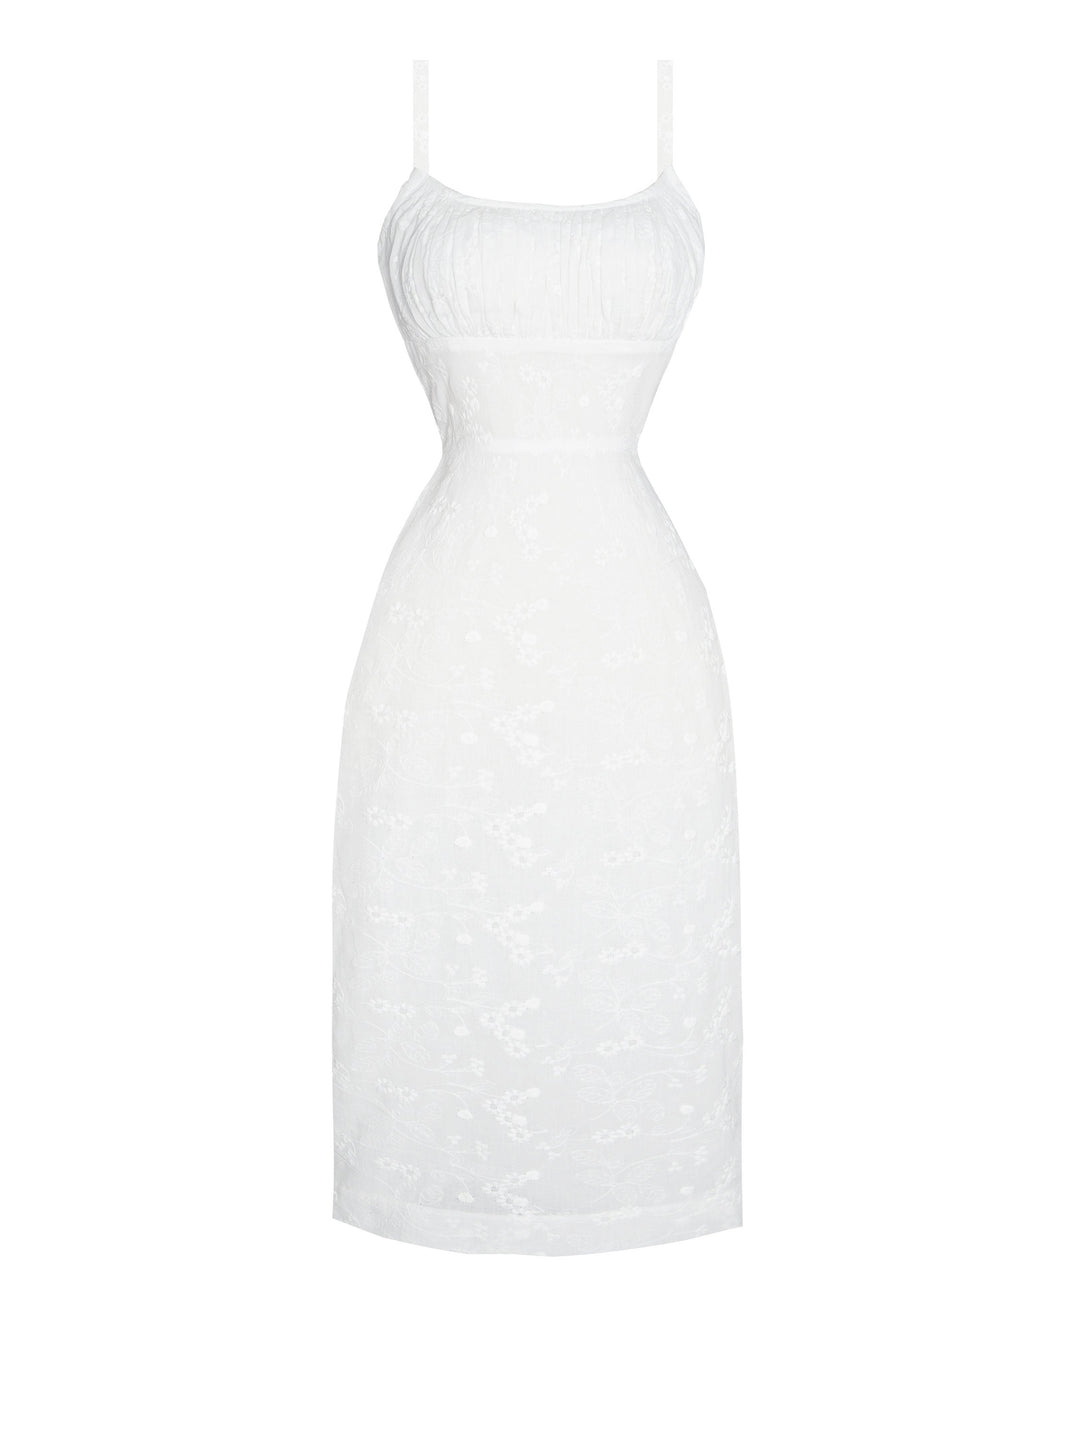 RTS - Size XS - Bettie Dress White "Delicate Blooms